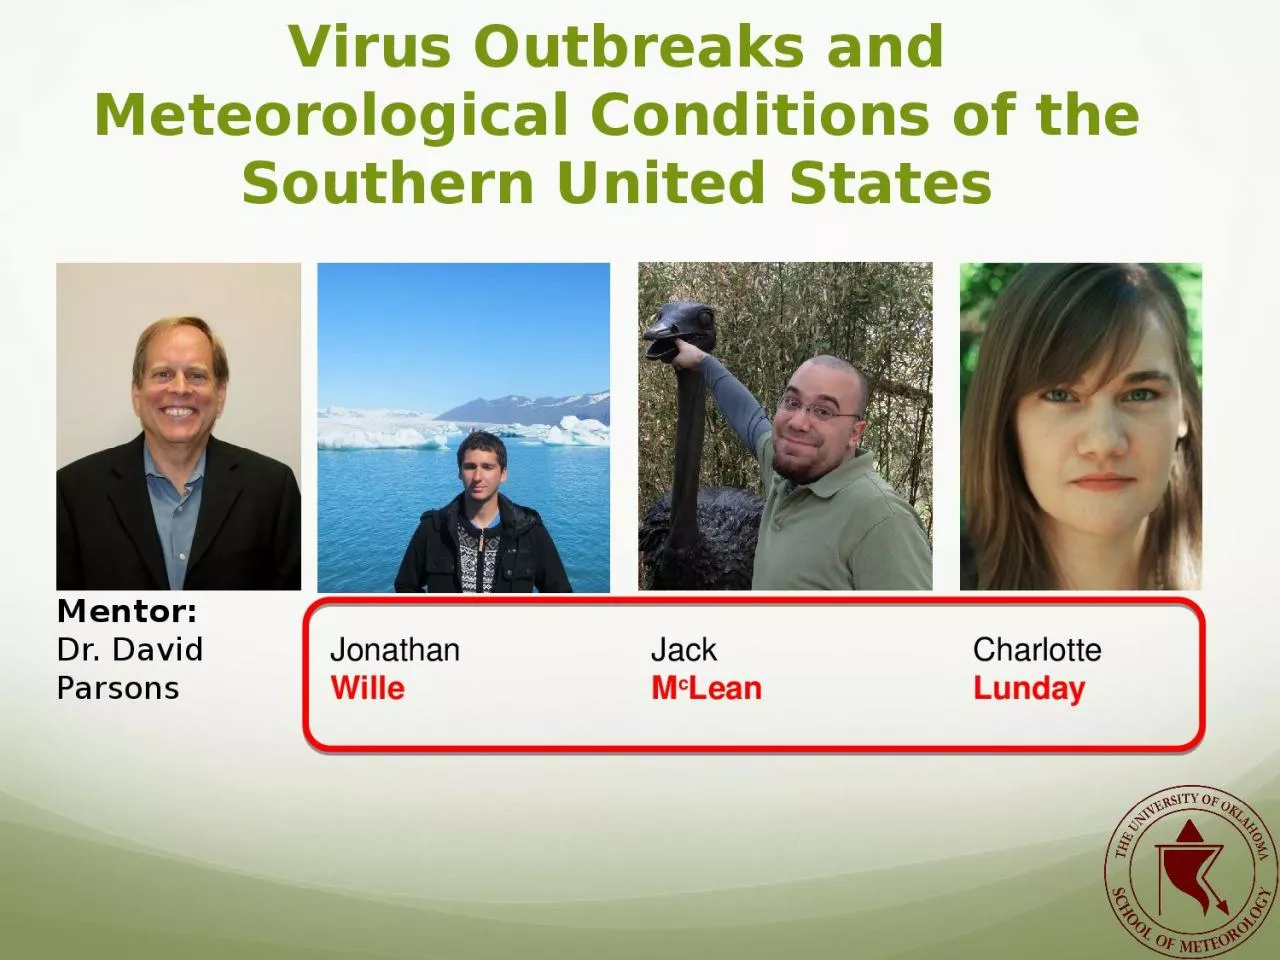 Correlations Between West Nile Virus Outbreaks and Meteorological Conditions of the Southern